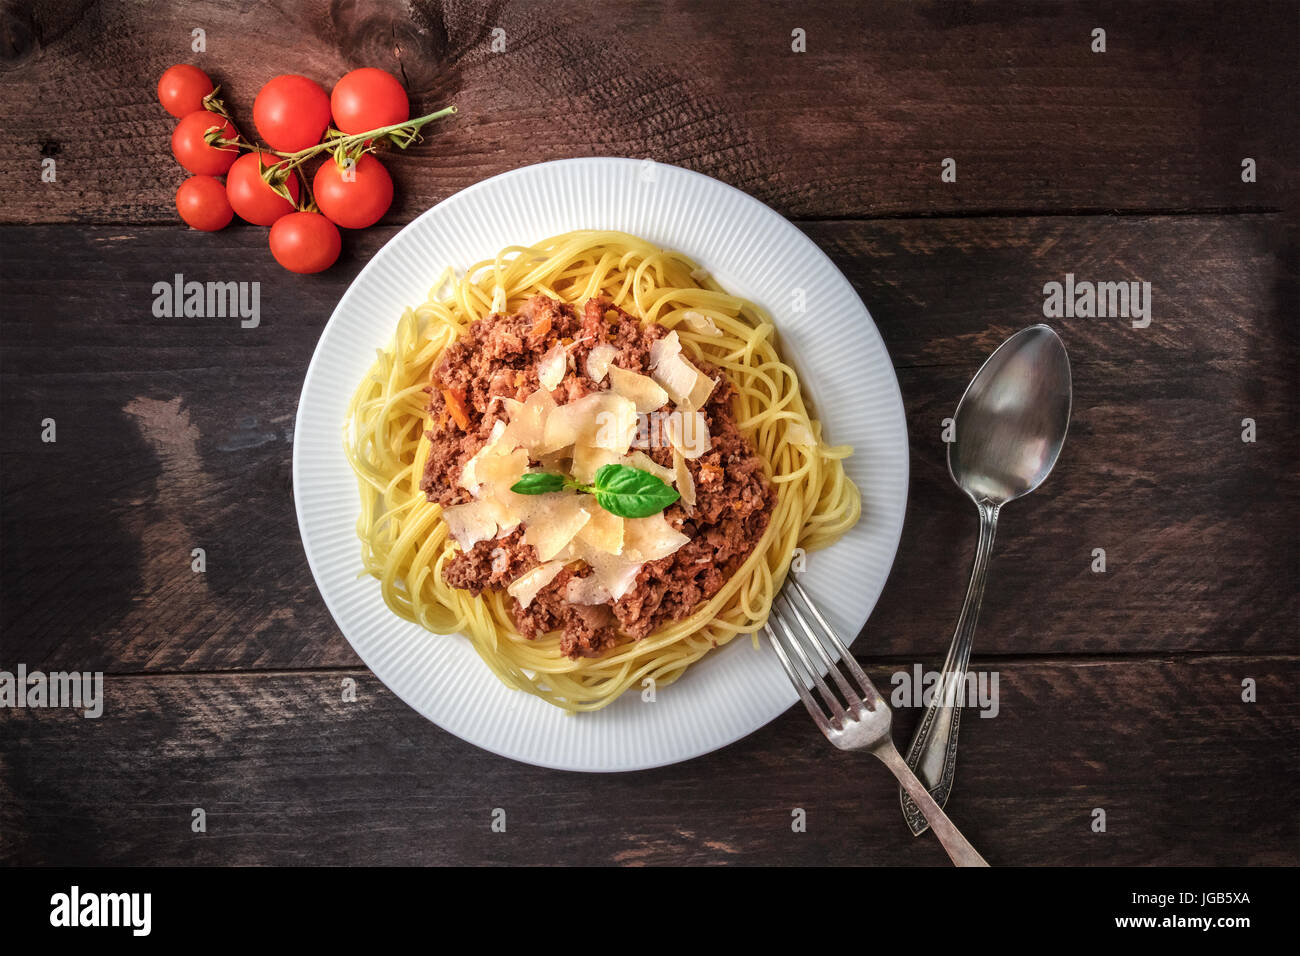 Pasta bolognese on rustic background with copyspace Stock Photo